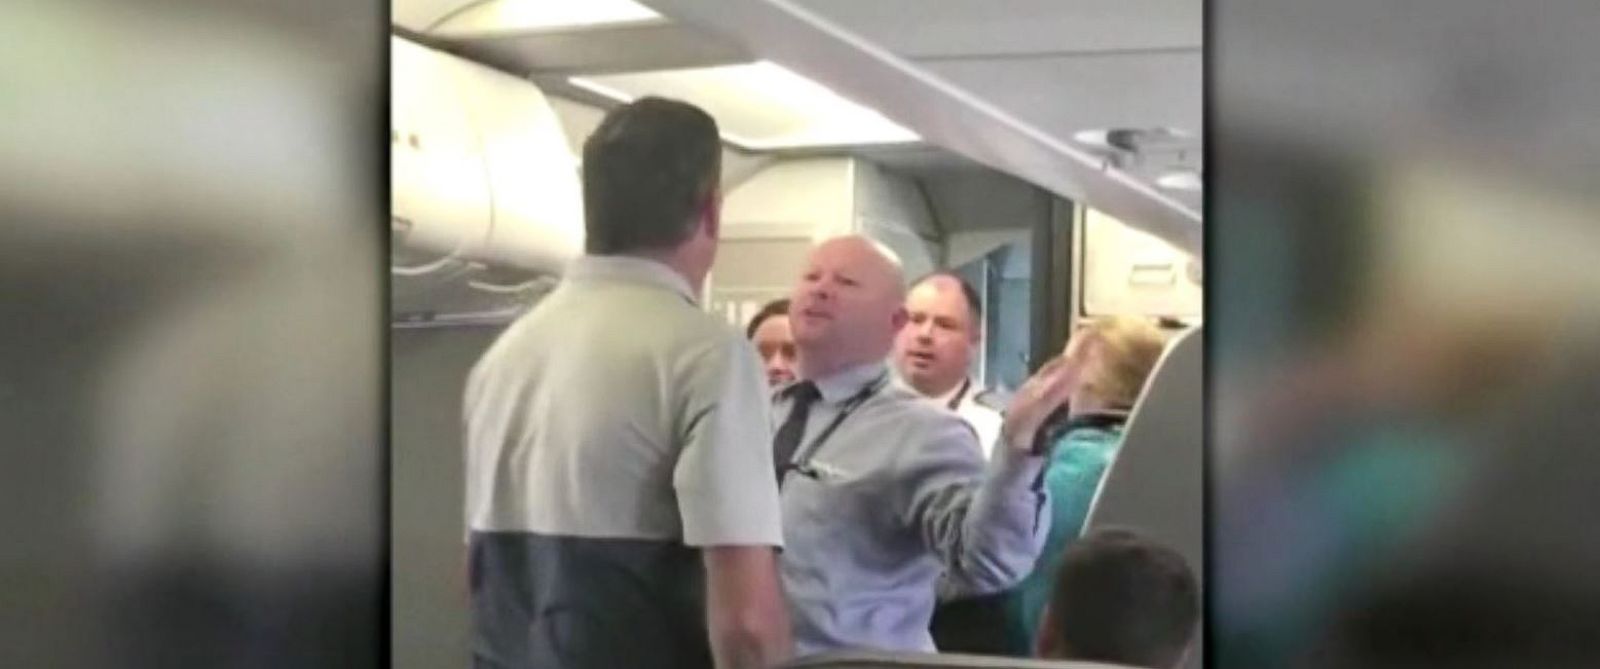 PHOTO: A passenger on an American Airlines aircraft in San Francisco on April 21, 2017, captured a heated moment between a flight attendant and passengers.